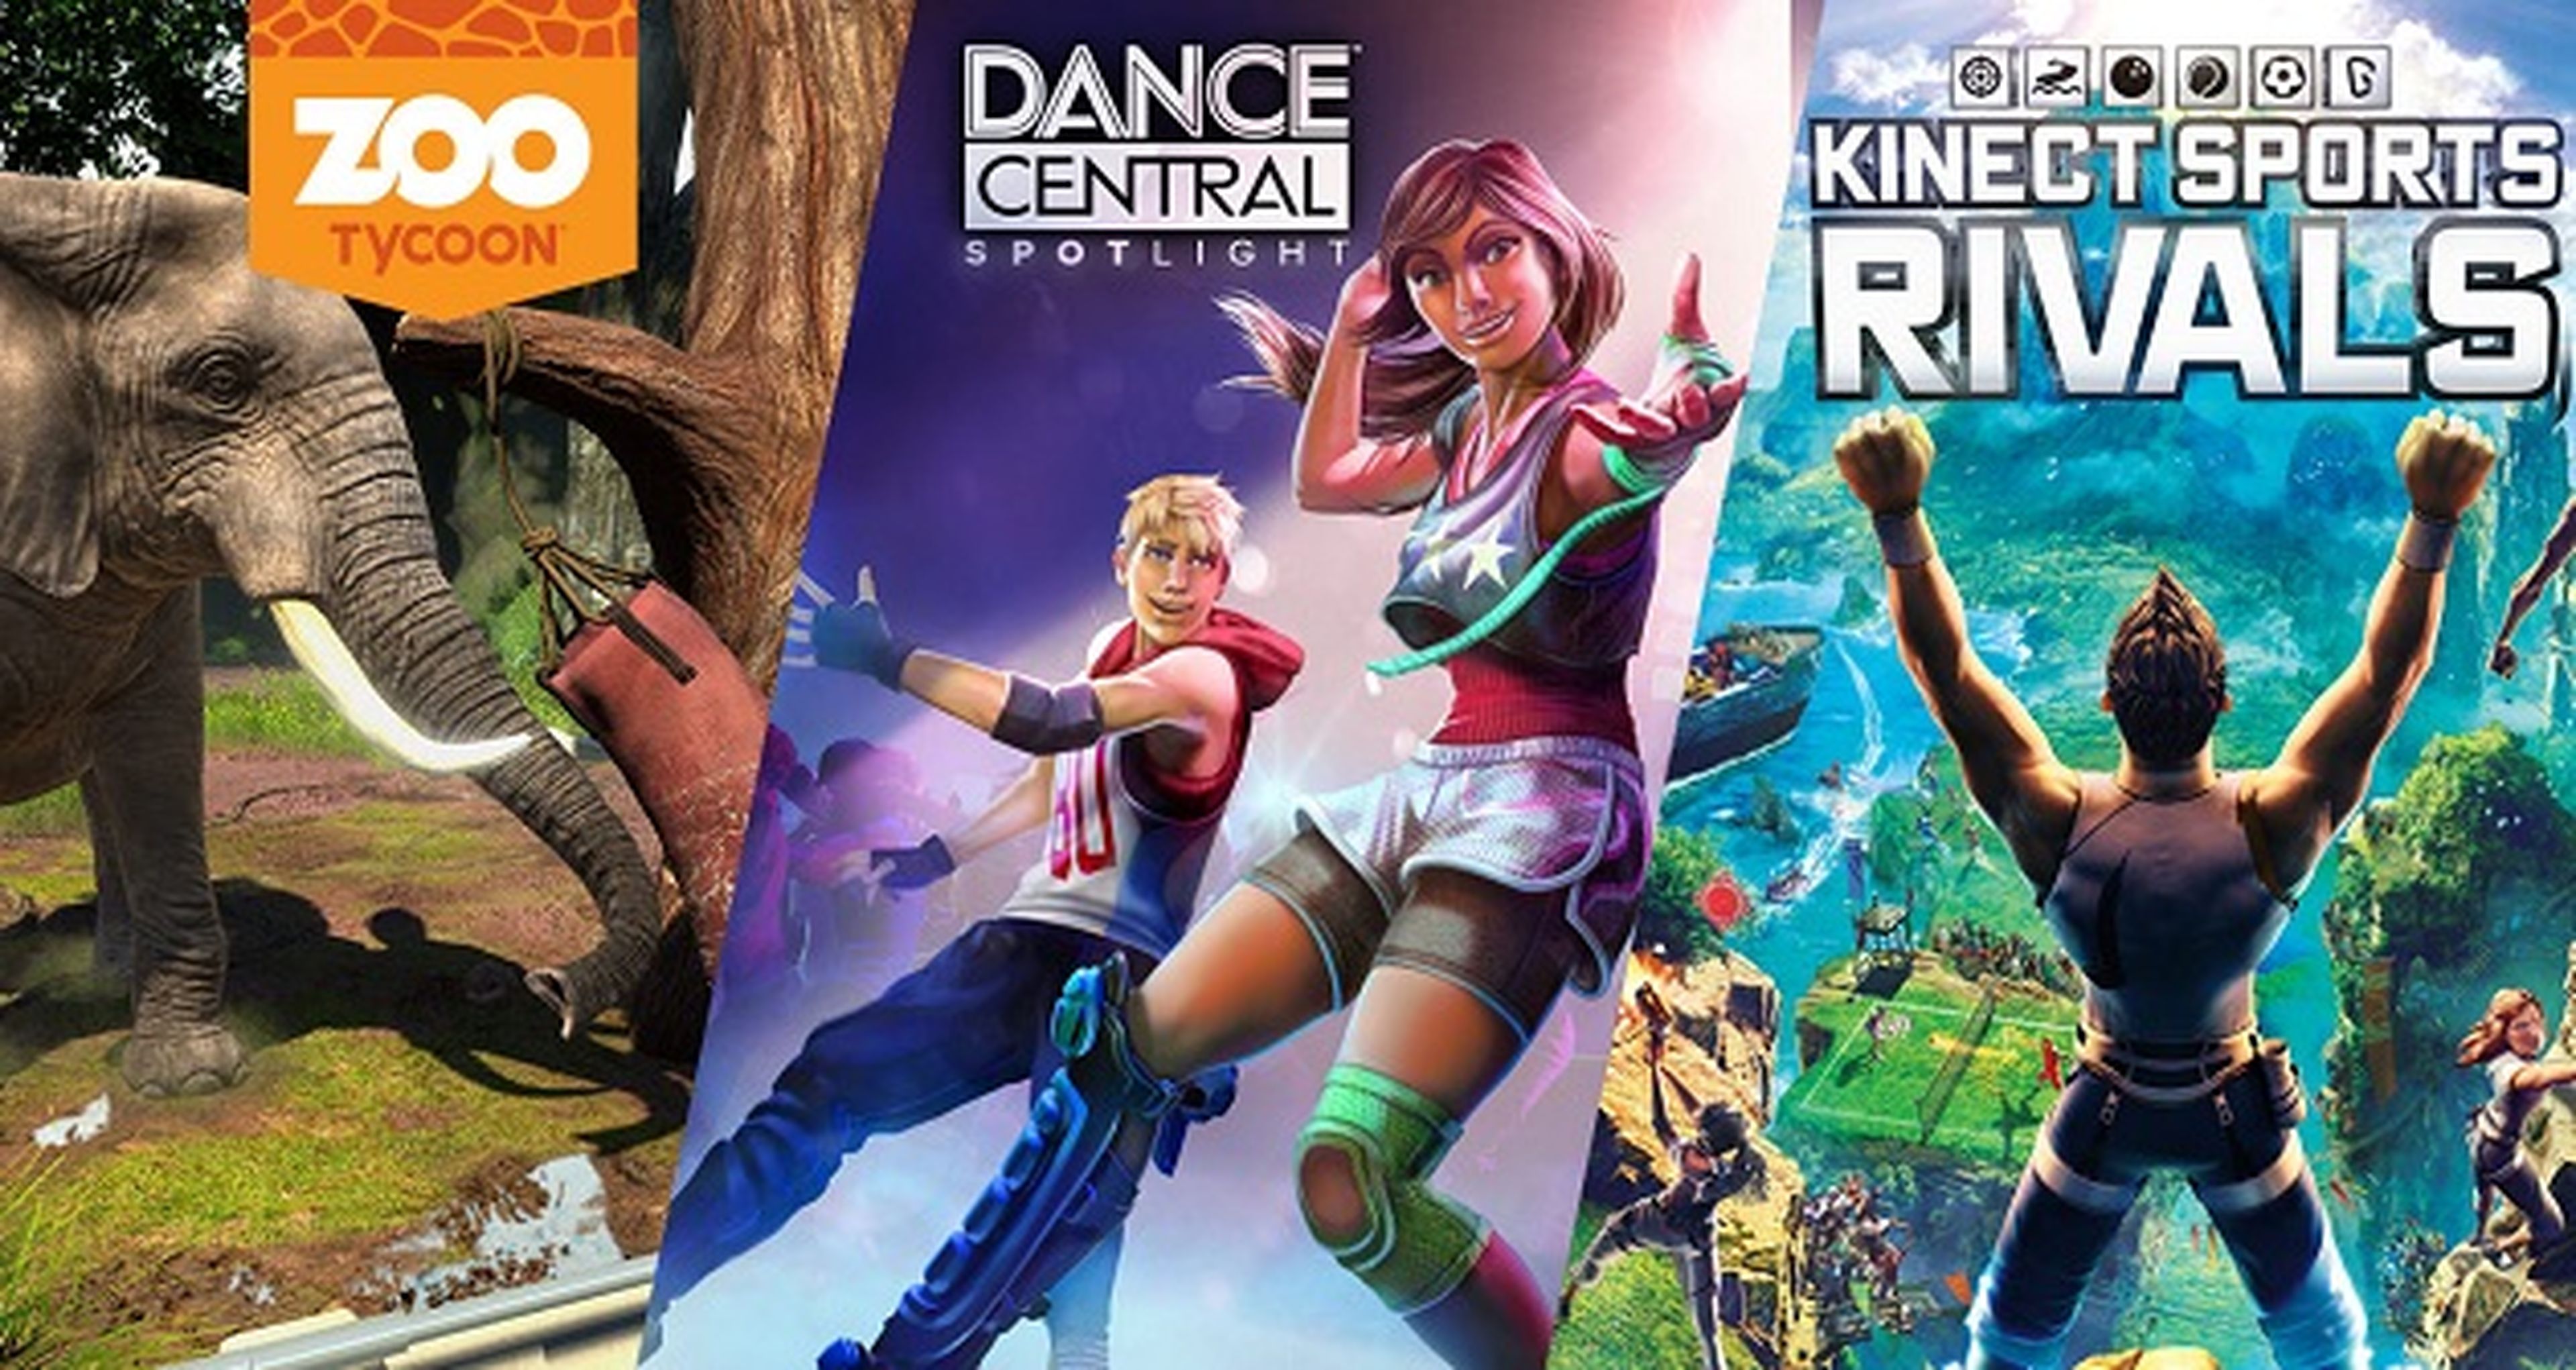 Pack de Xbox One + Kinect + Kinect Sports Rivals + Dance Central Spotlight + Zoo Tycoon